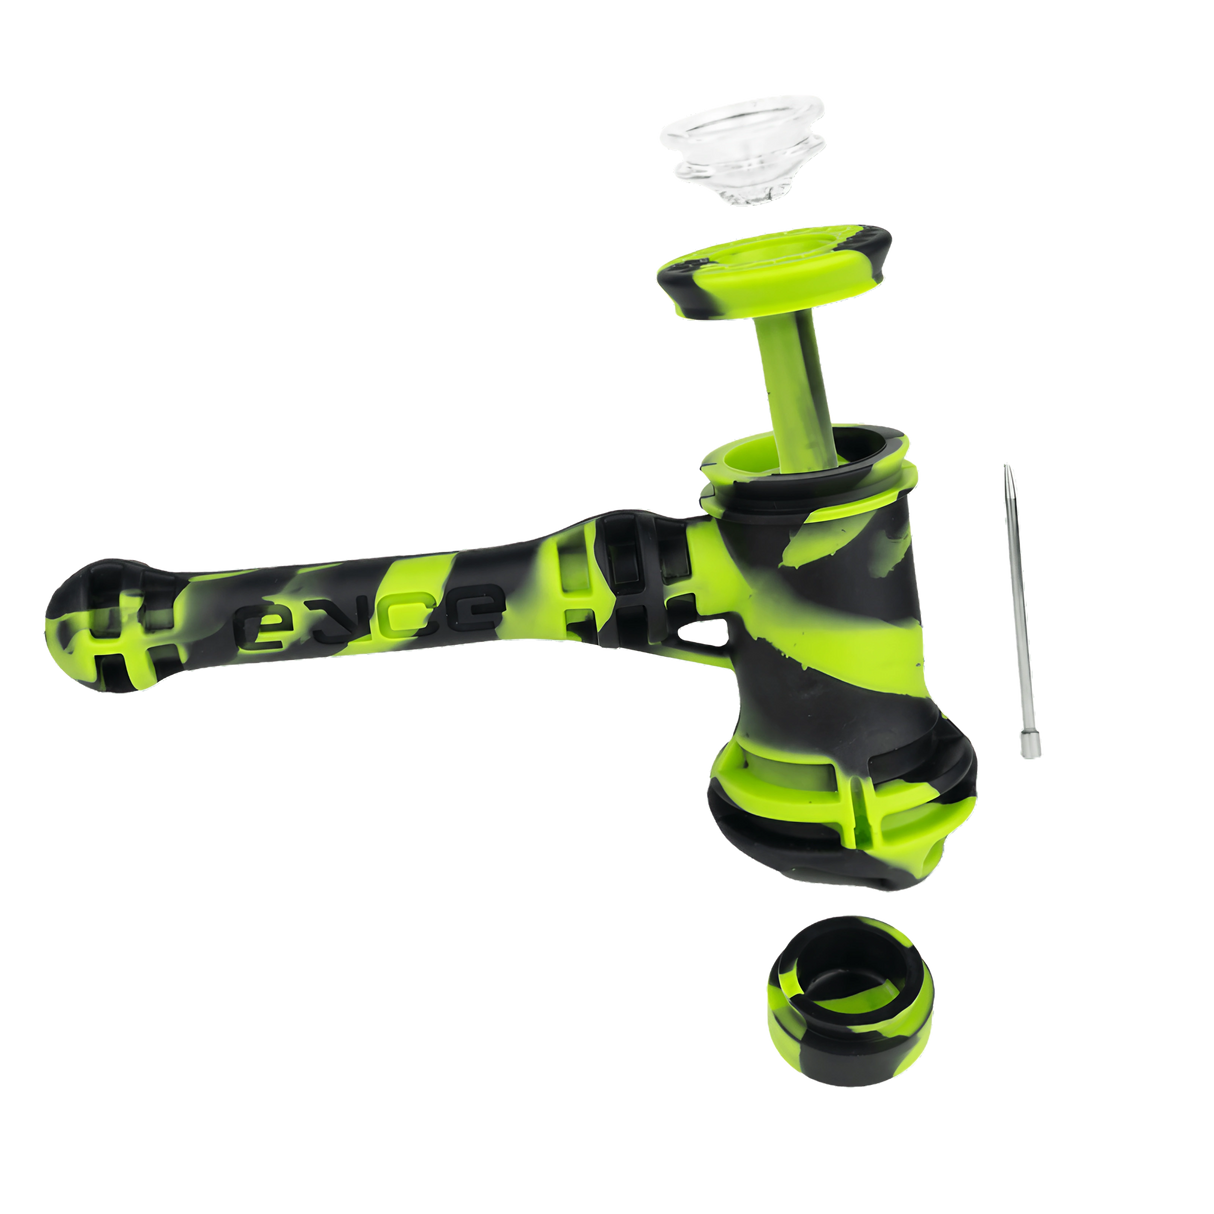 Eyce Hammer Bubbler in green and black silicone with steel poker and glass bowl, portable design